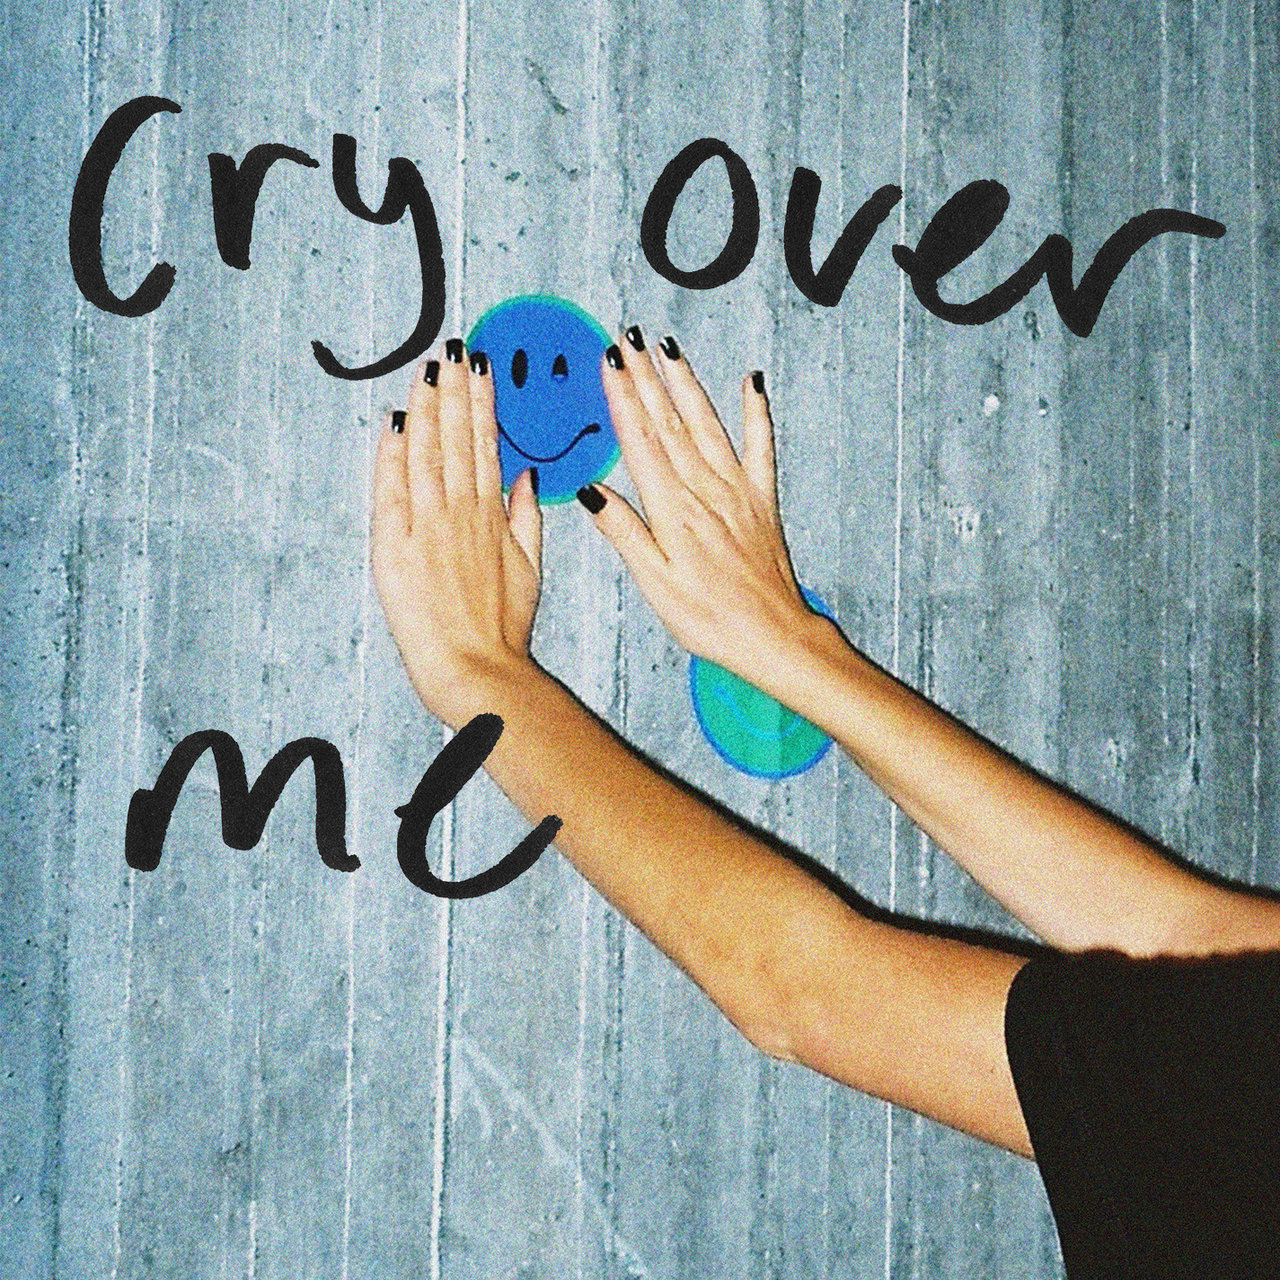 Rhys Cry over me cover artwork